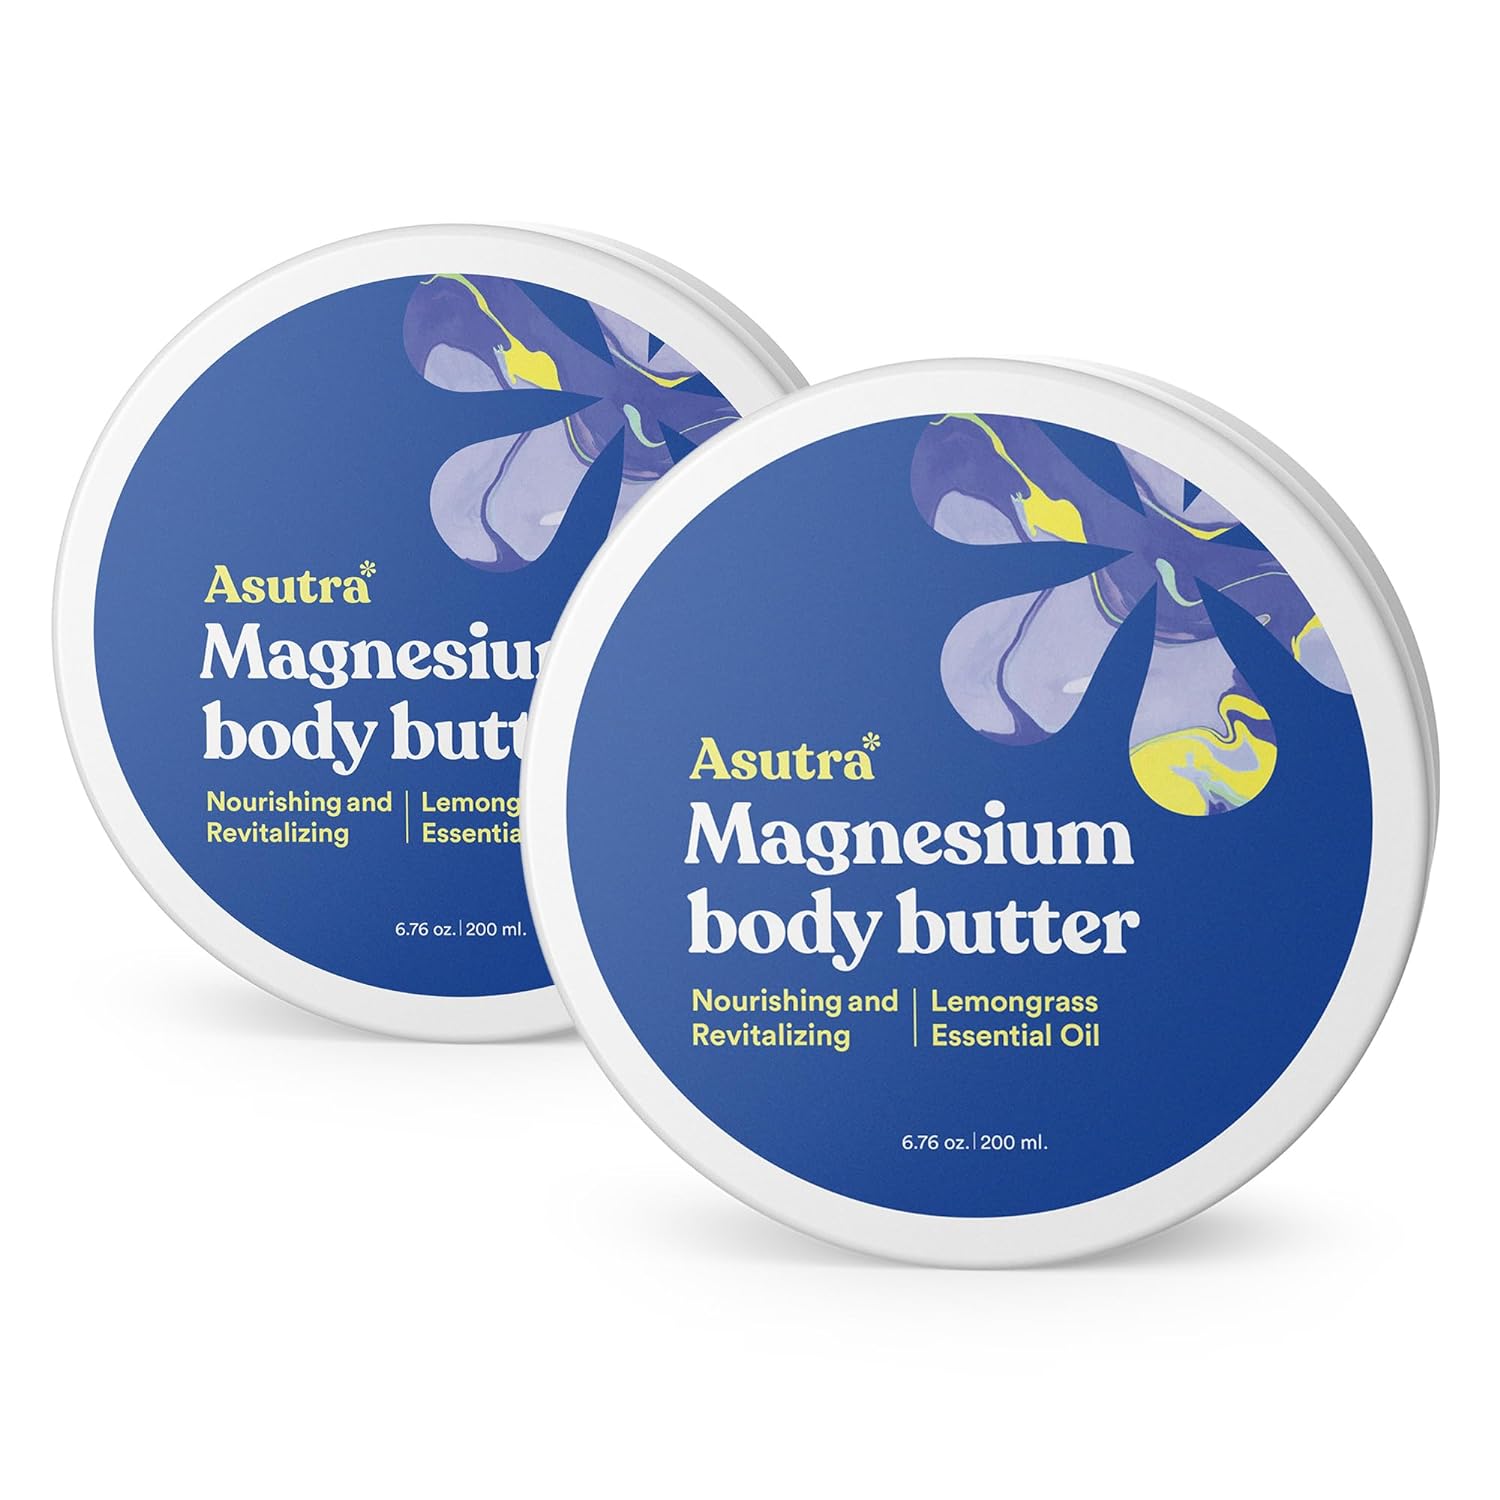 ASUTRA Magnesium Body Butter Lotion 2 Pack | Natural Soothing Shea Butter & Almond Oil Moisturizer | Premium-Quality Magnesium Oil, 6.76 oz (2 Pack)